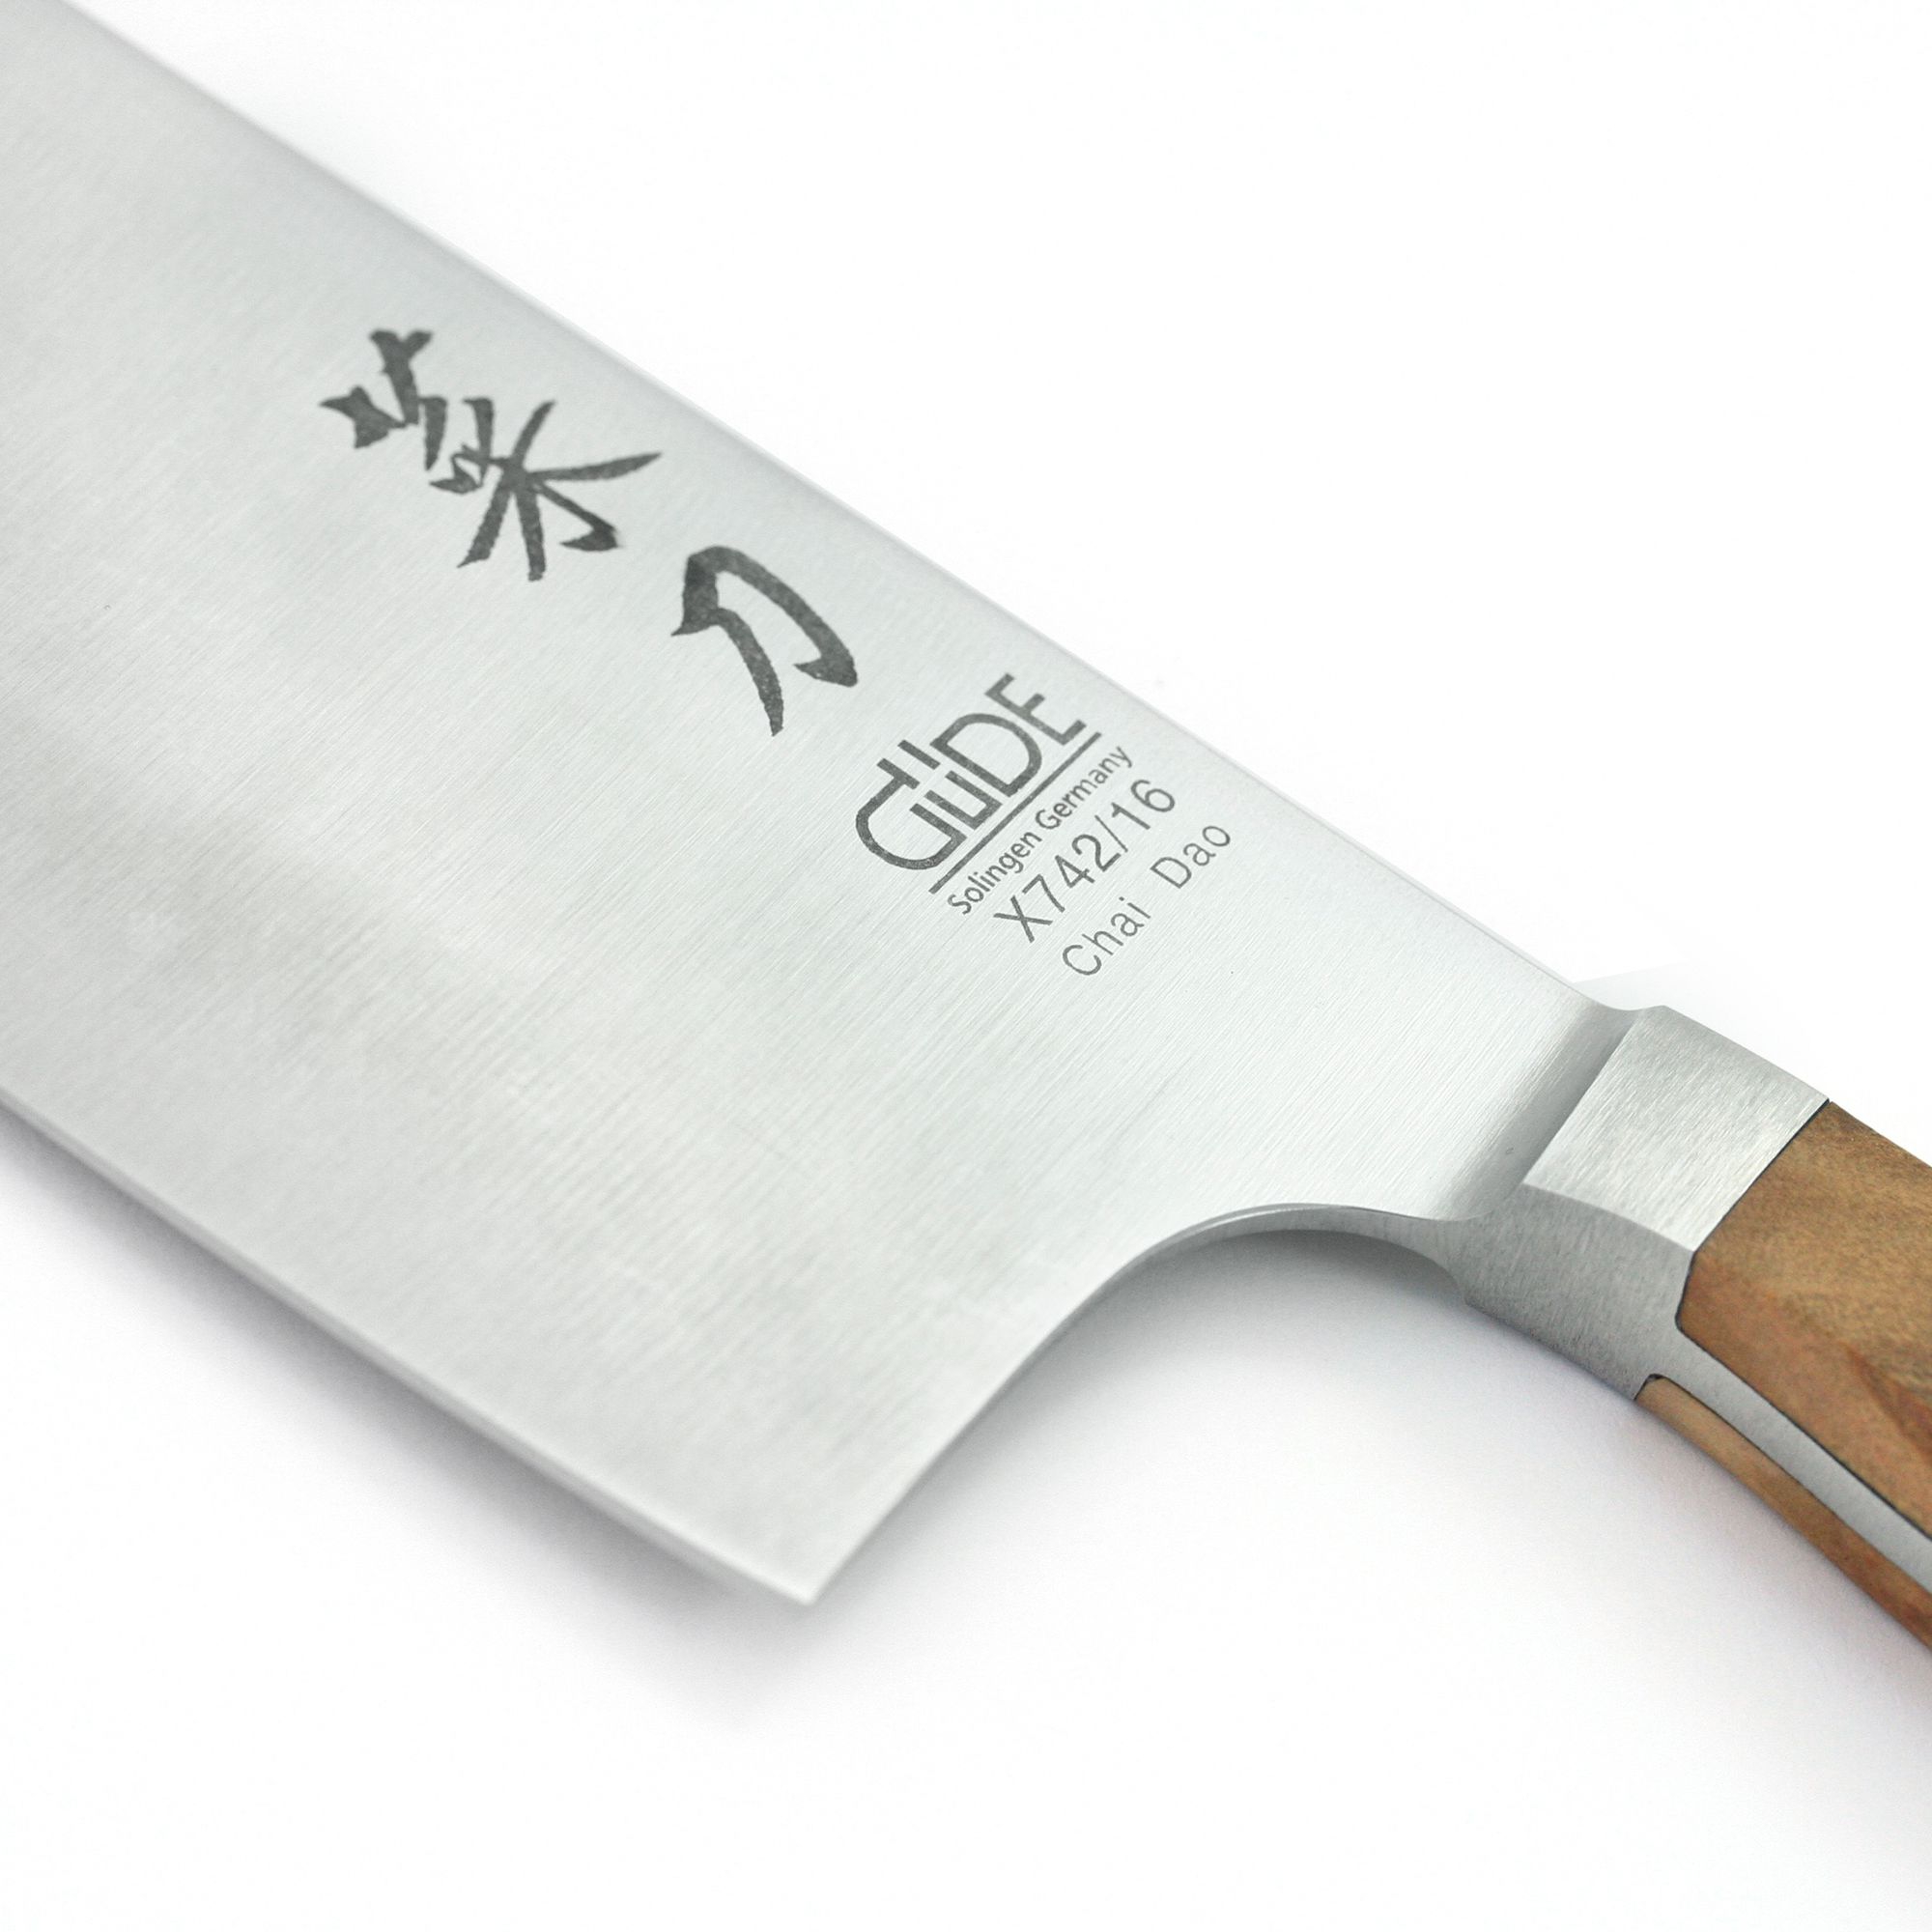 Güde - Chai Dao, Chinese chef's knife 16 cm - Alpha Olive